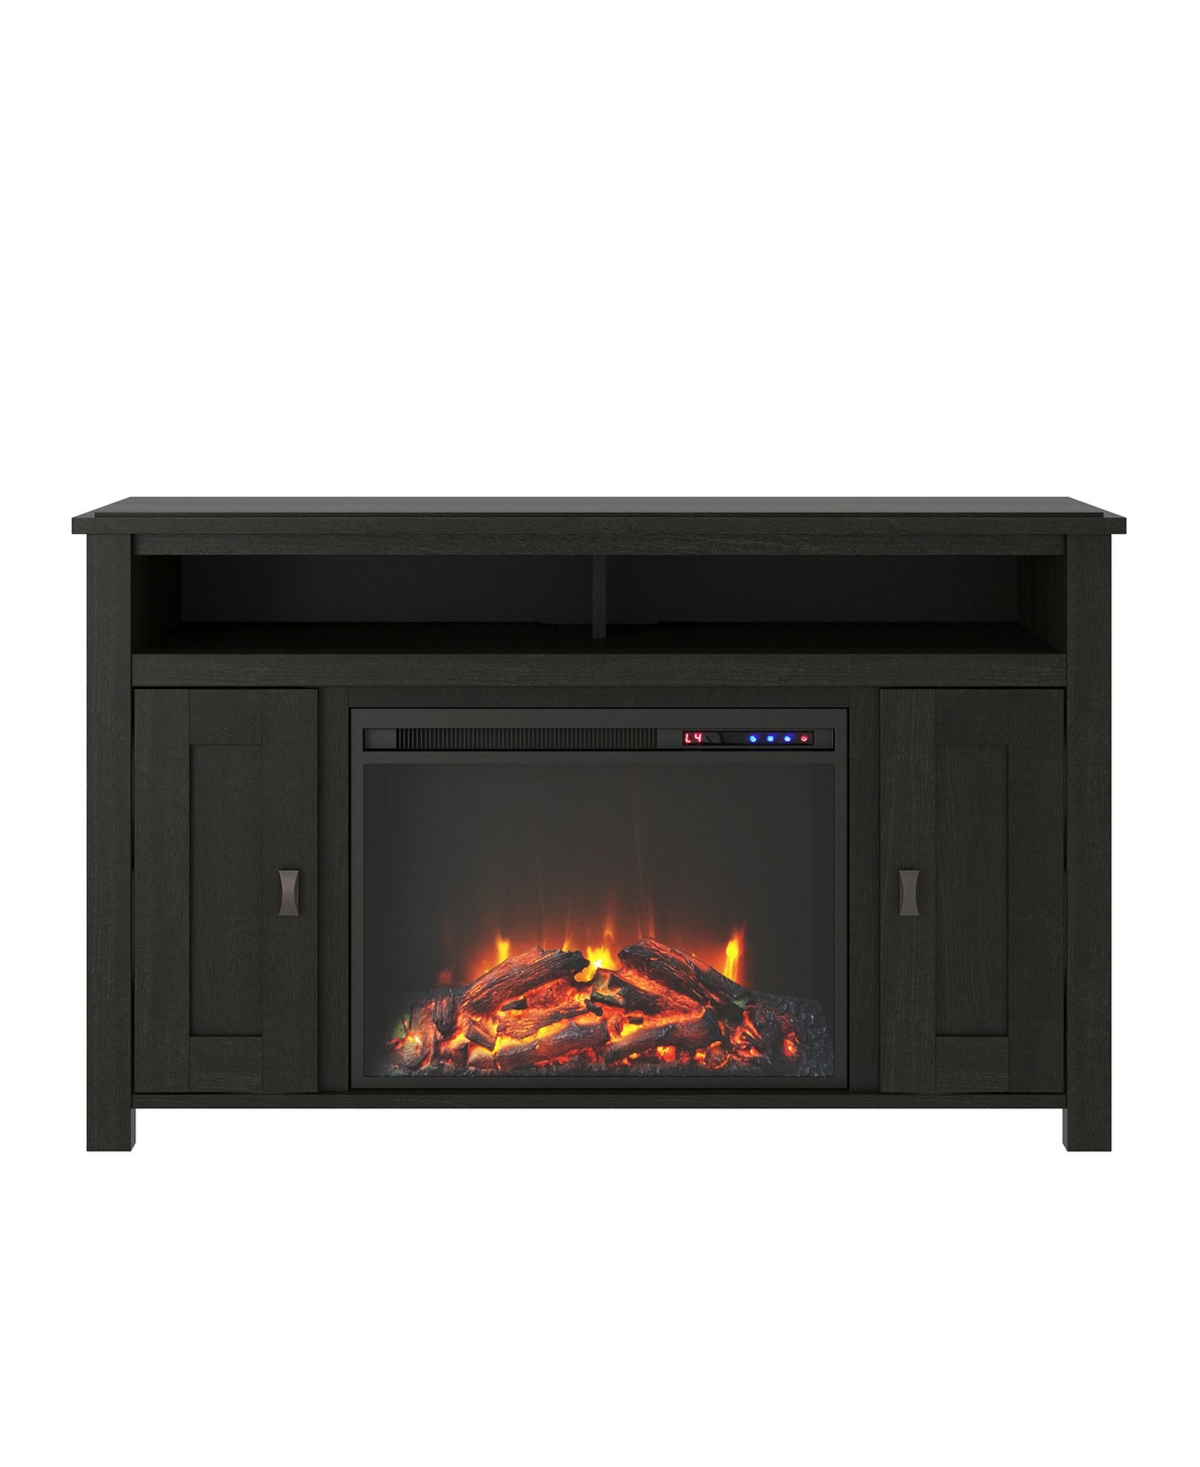 Ameriwood Home Winthrop Electric Fireplace Tv Console For Tvs Up To 50